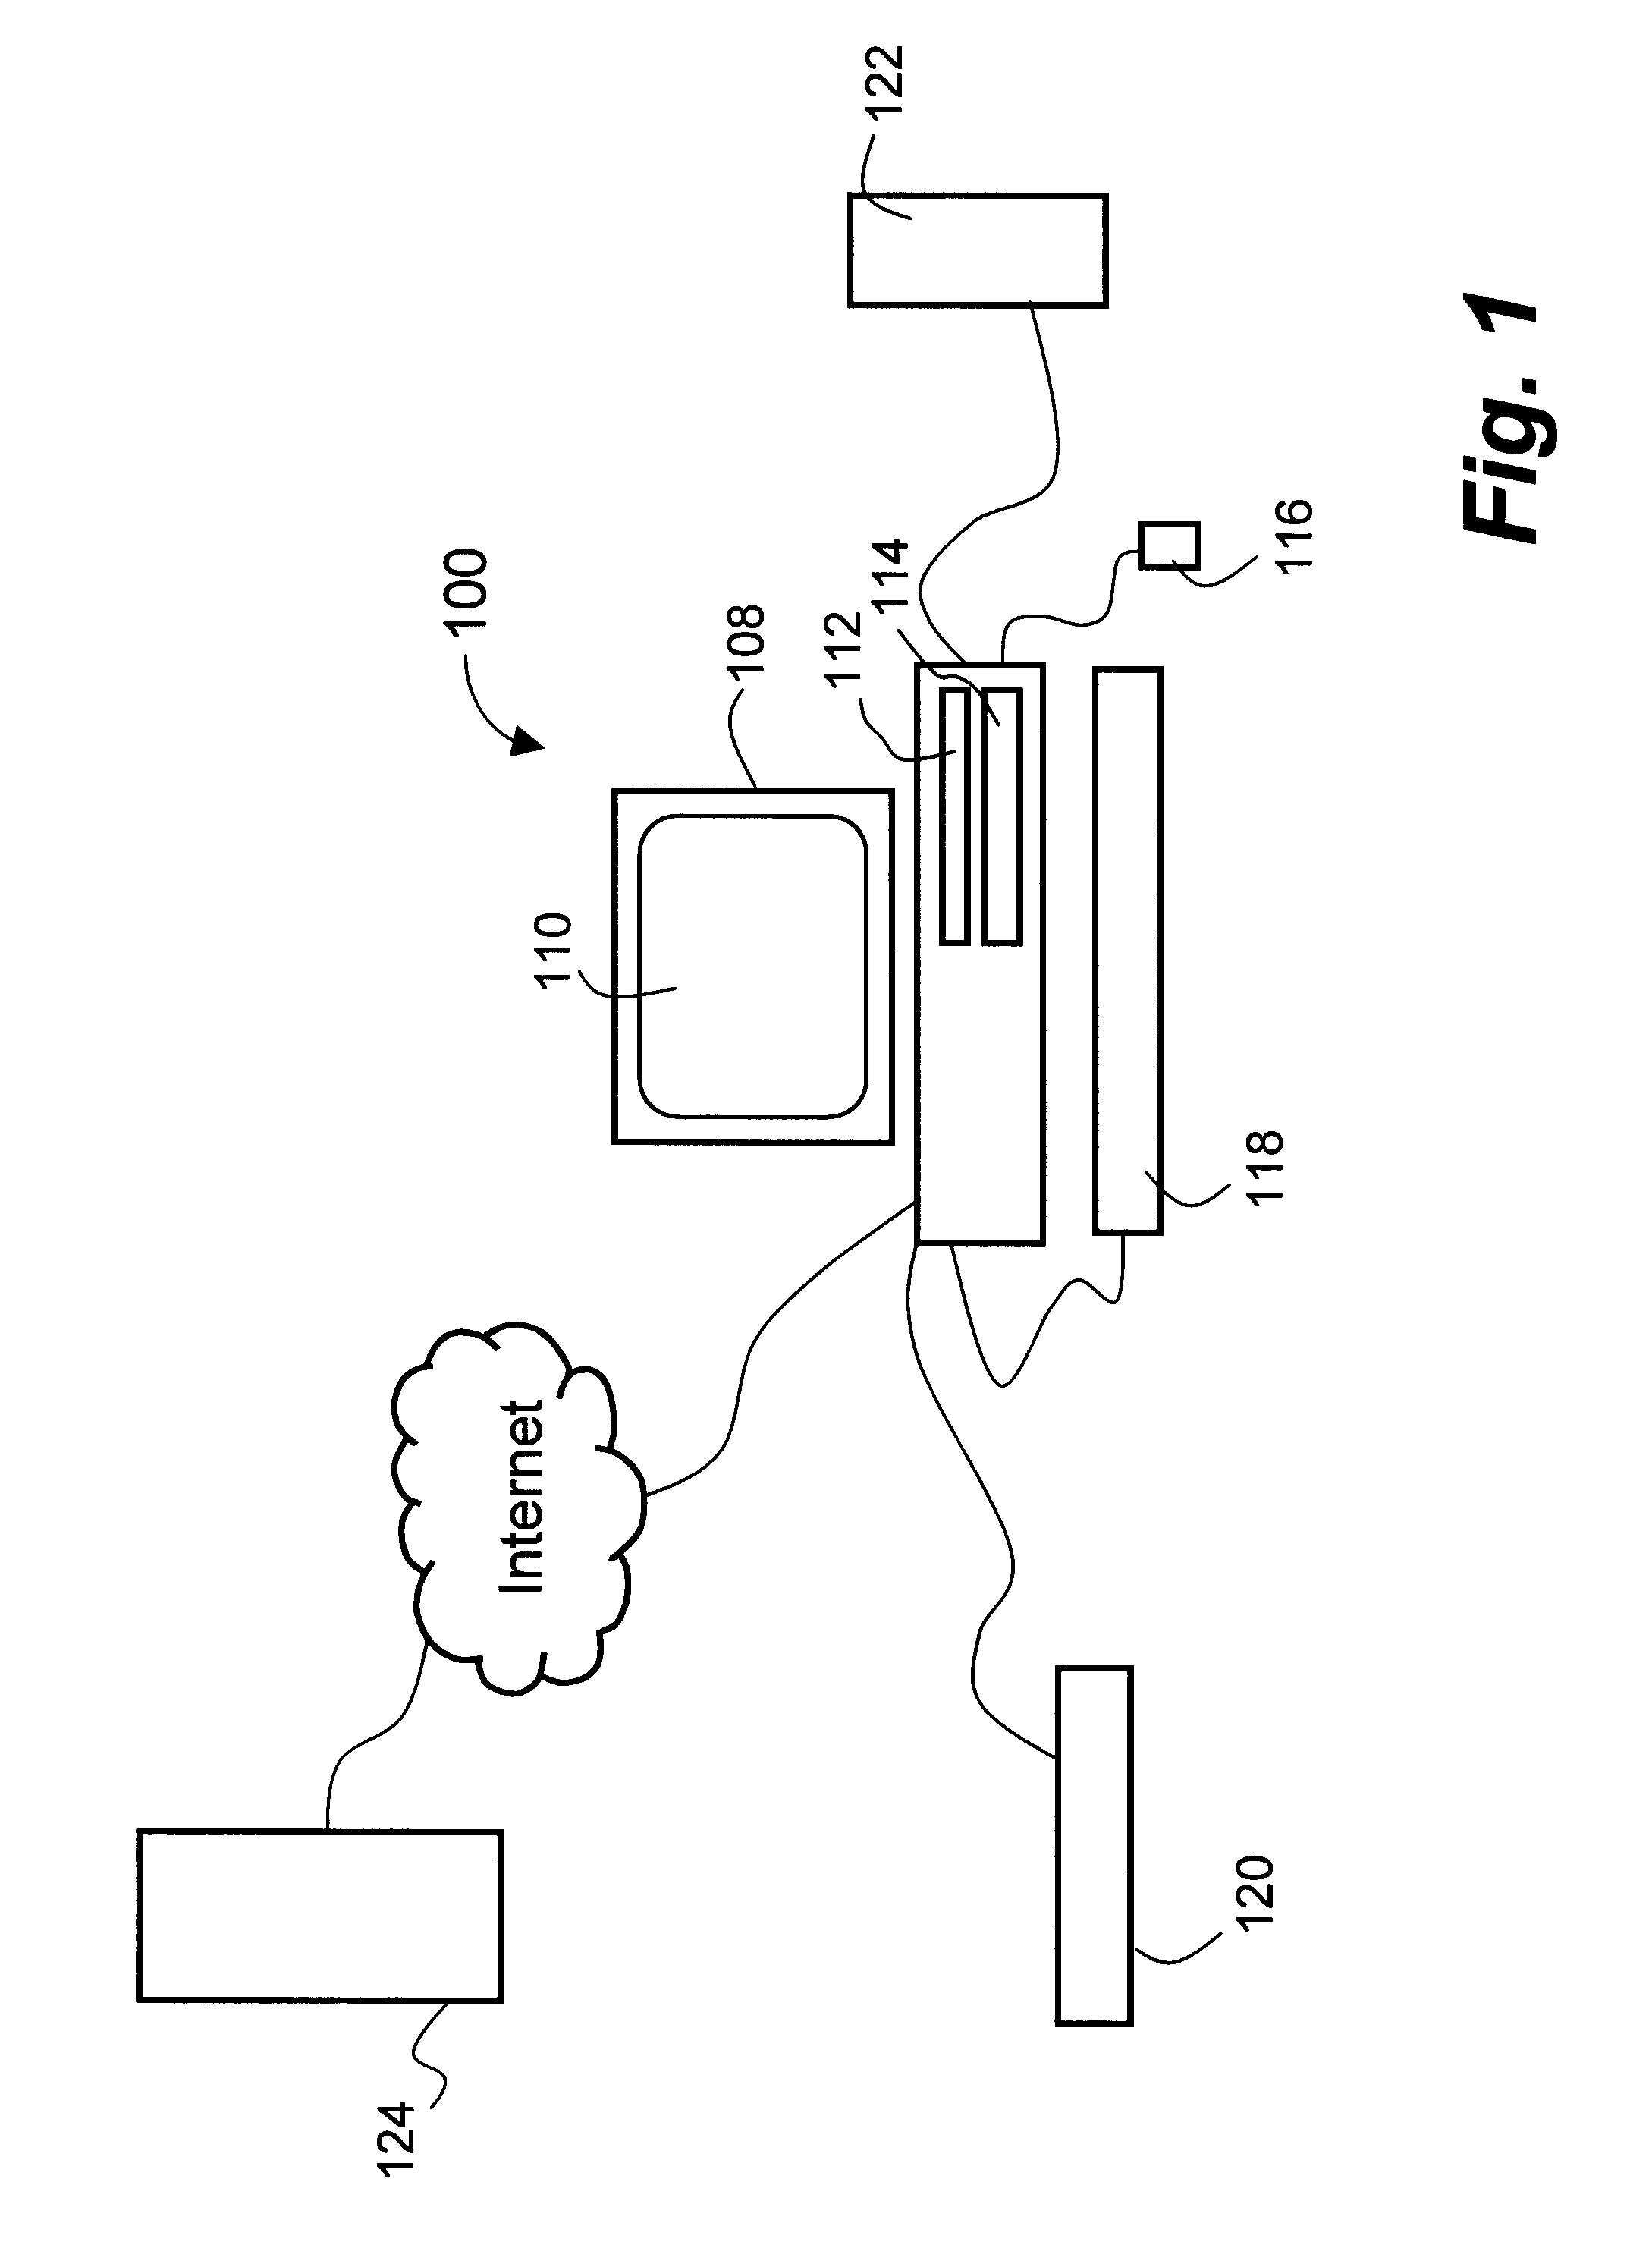 Method and apparatus for preserving background continuity in images